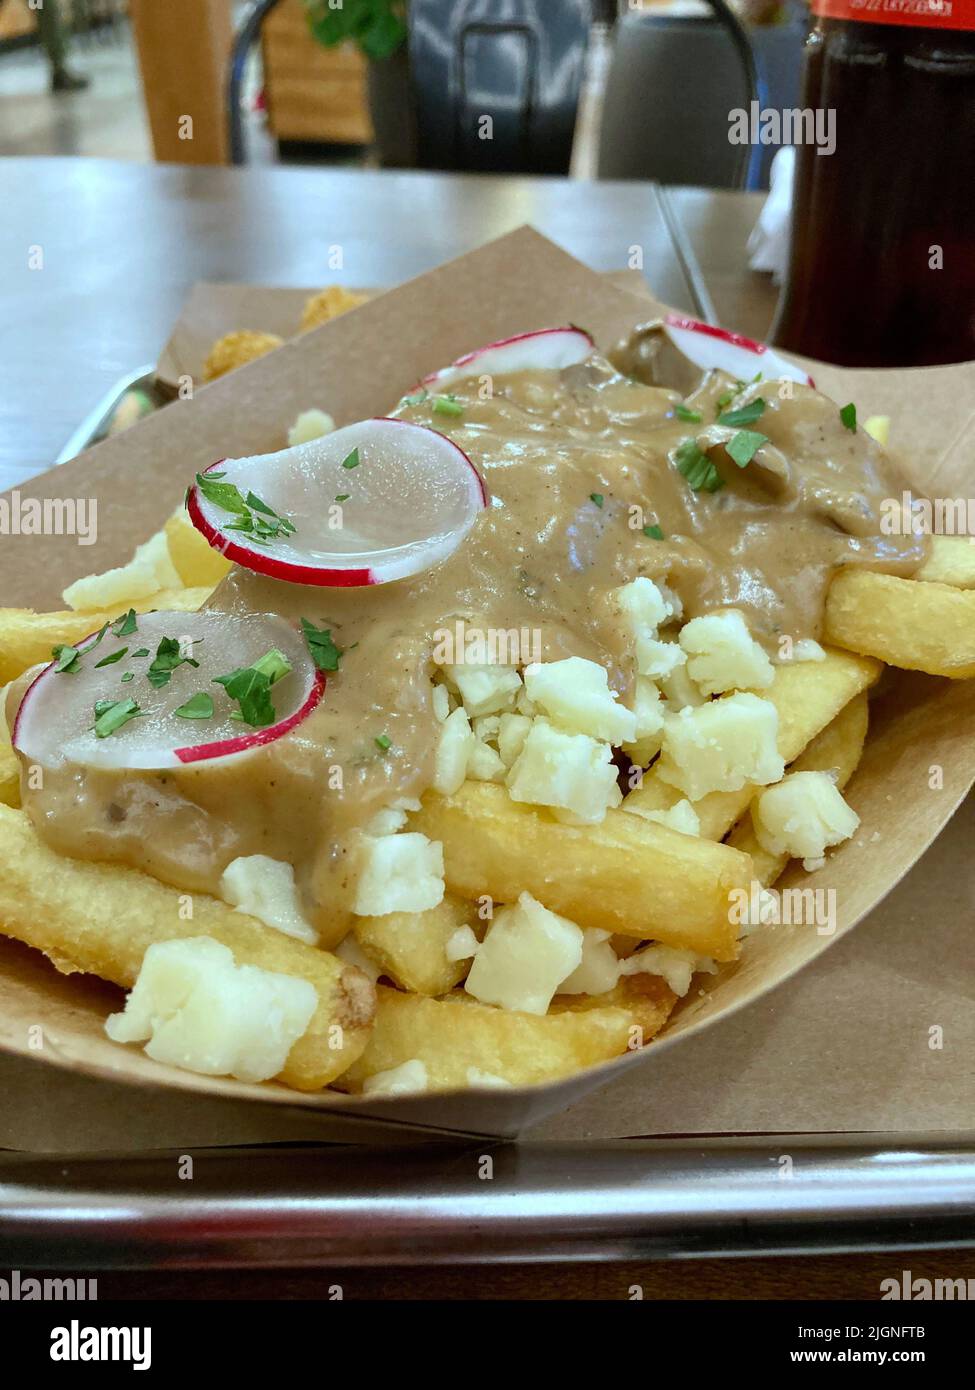 delicious poutine, french fries with gravy or sauce garnish with cheese and reddish Stock Photo